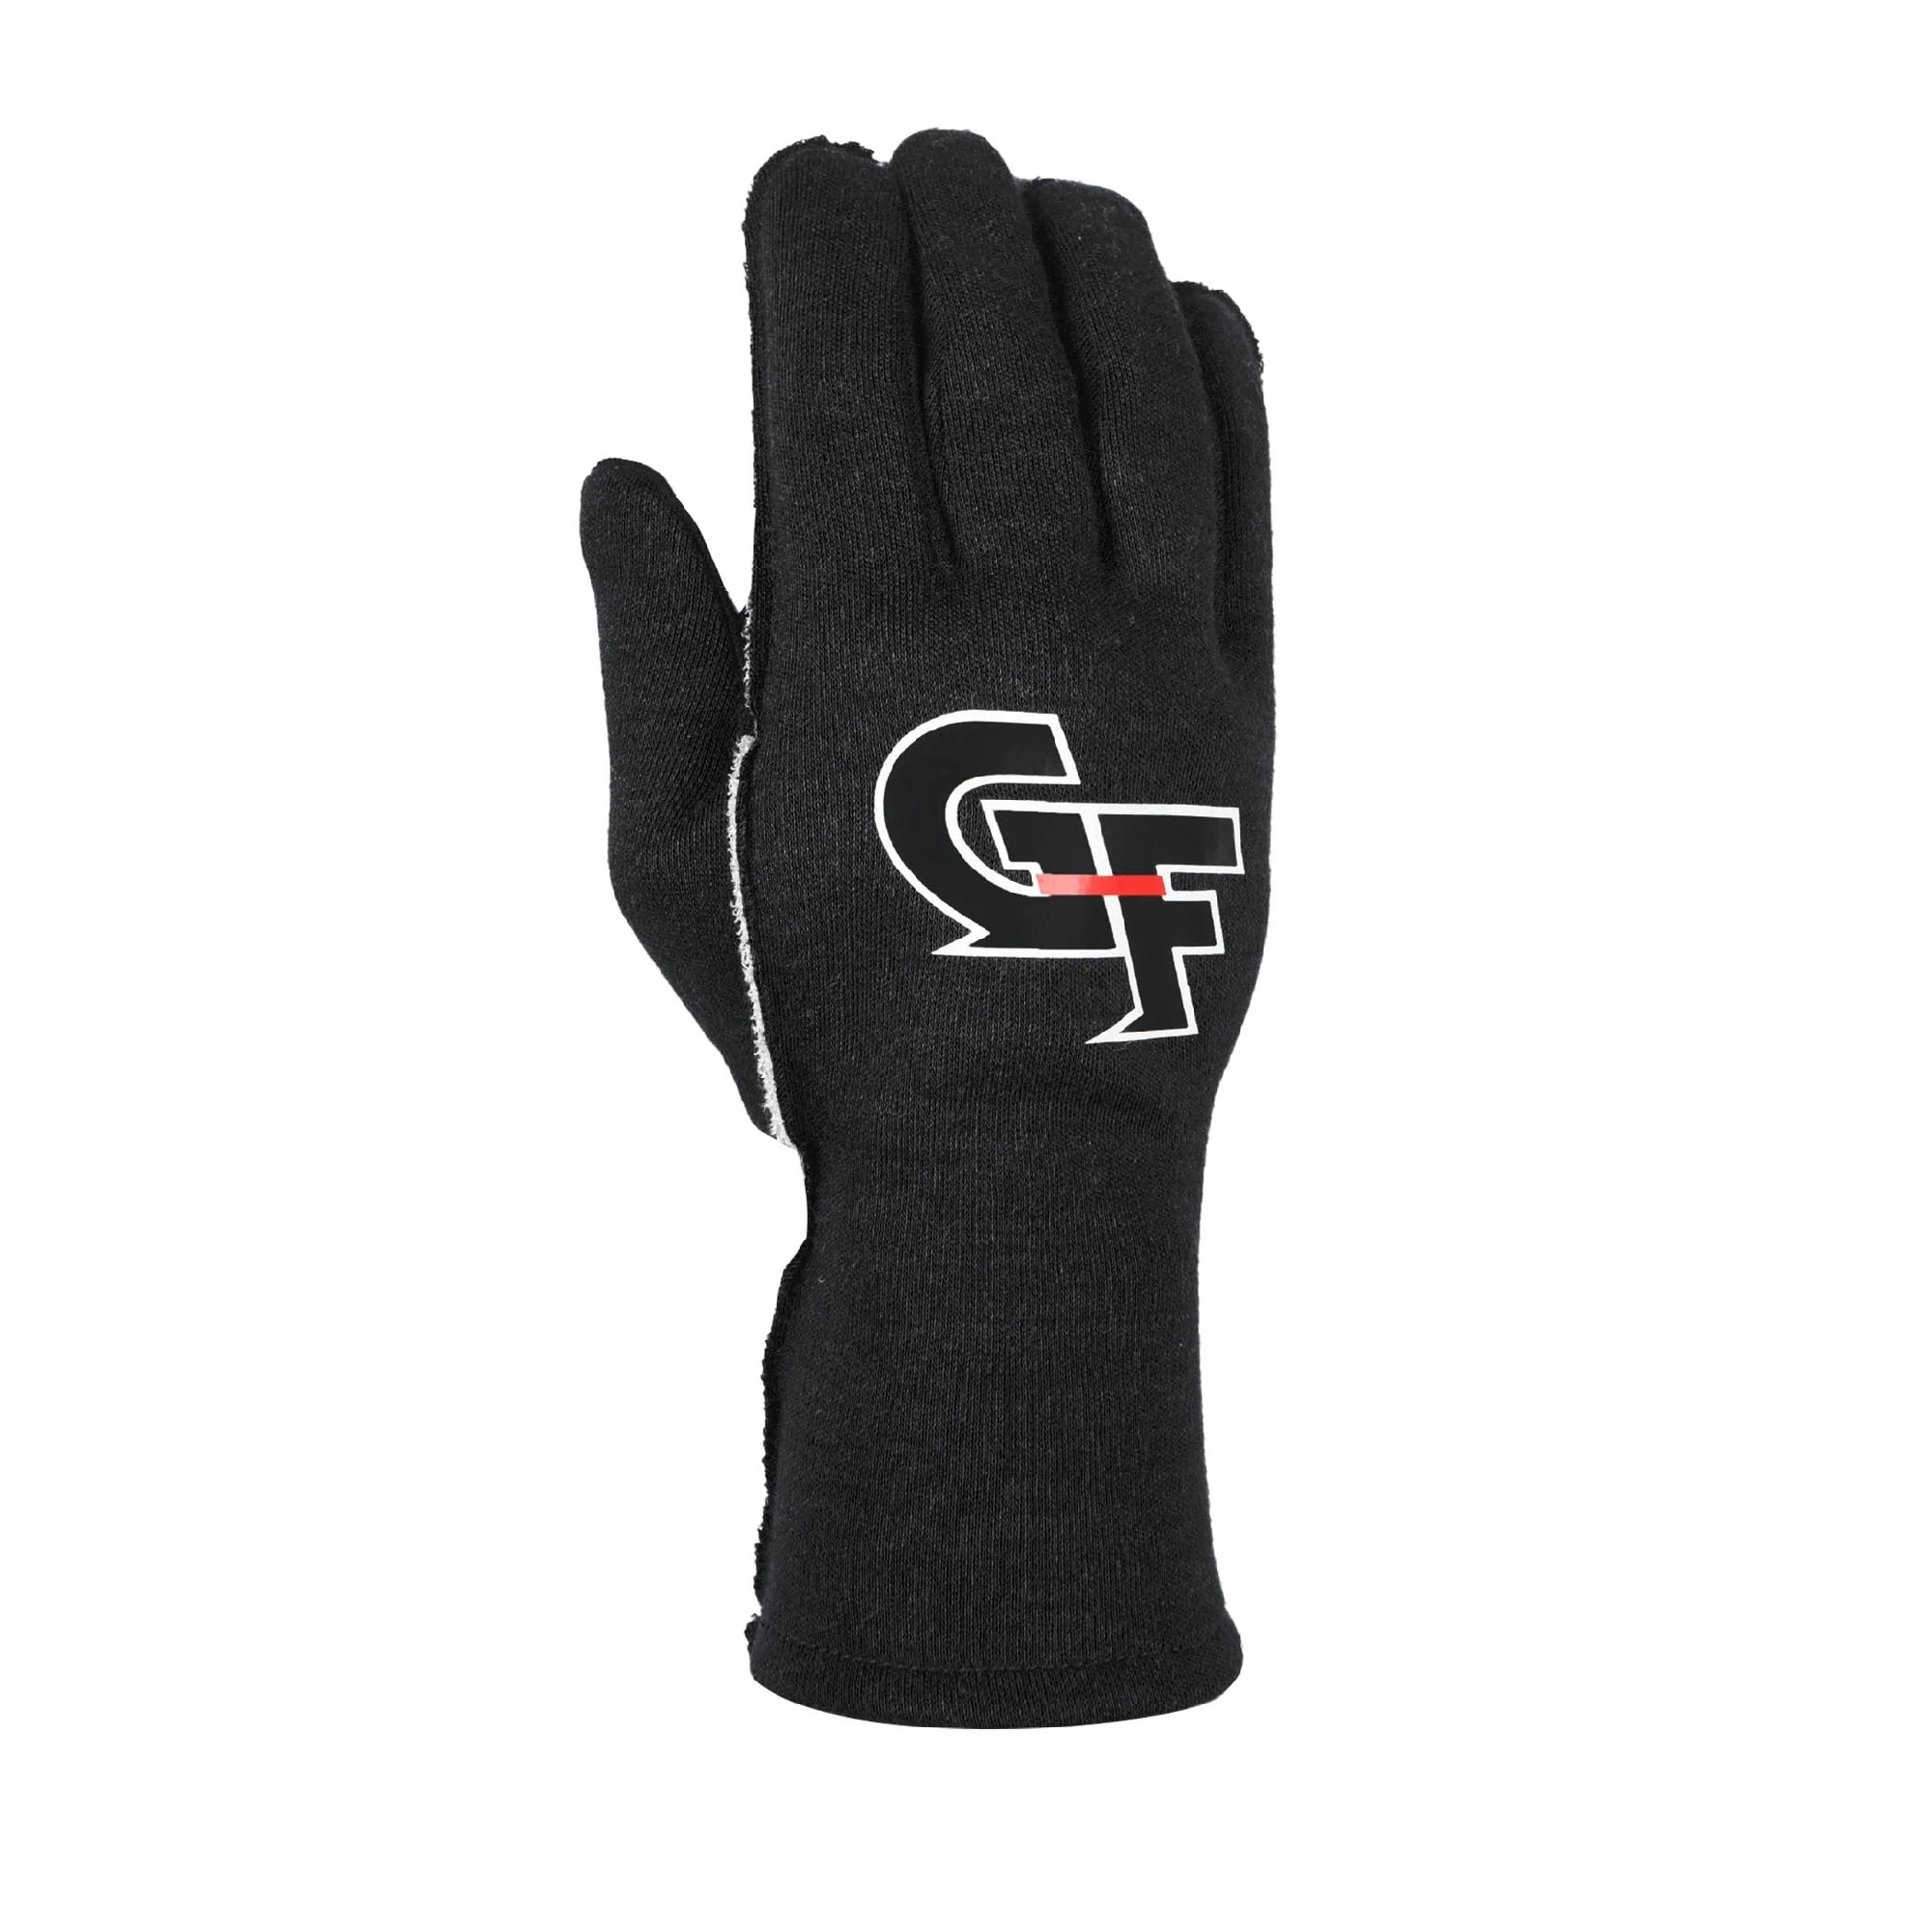 G-Force Racing Gear 54000XLGBK Driving Gloves, G-Limit RS, Double Layer, SFI 3.3/5, Nomex, Black, X-Large, Pair